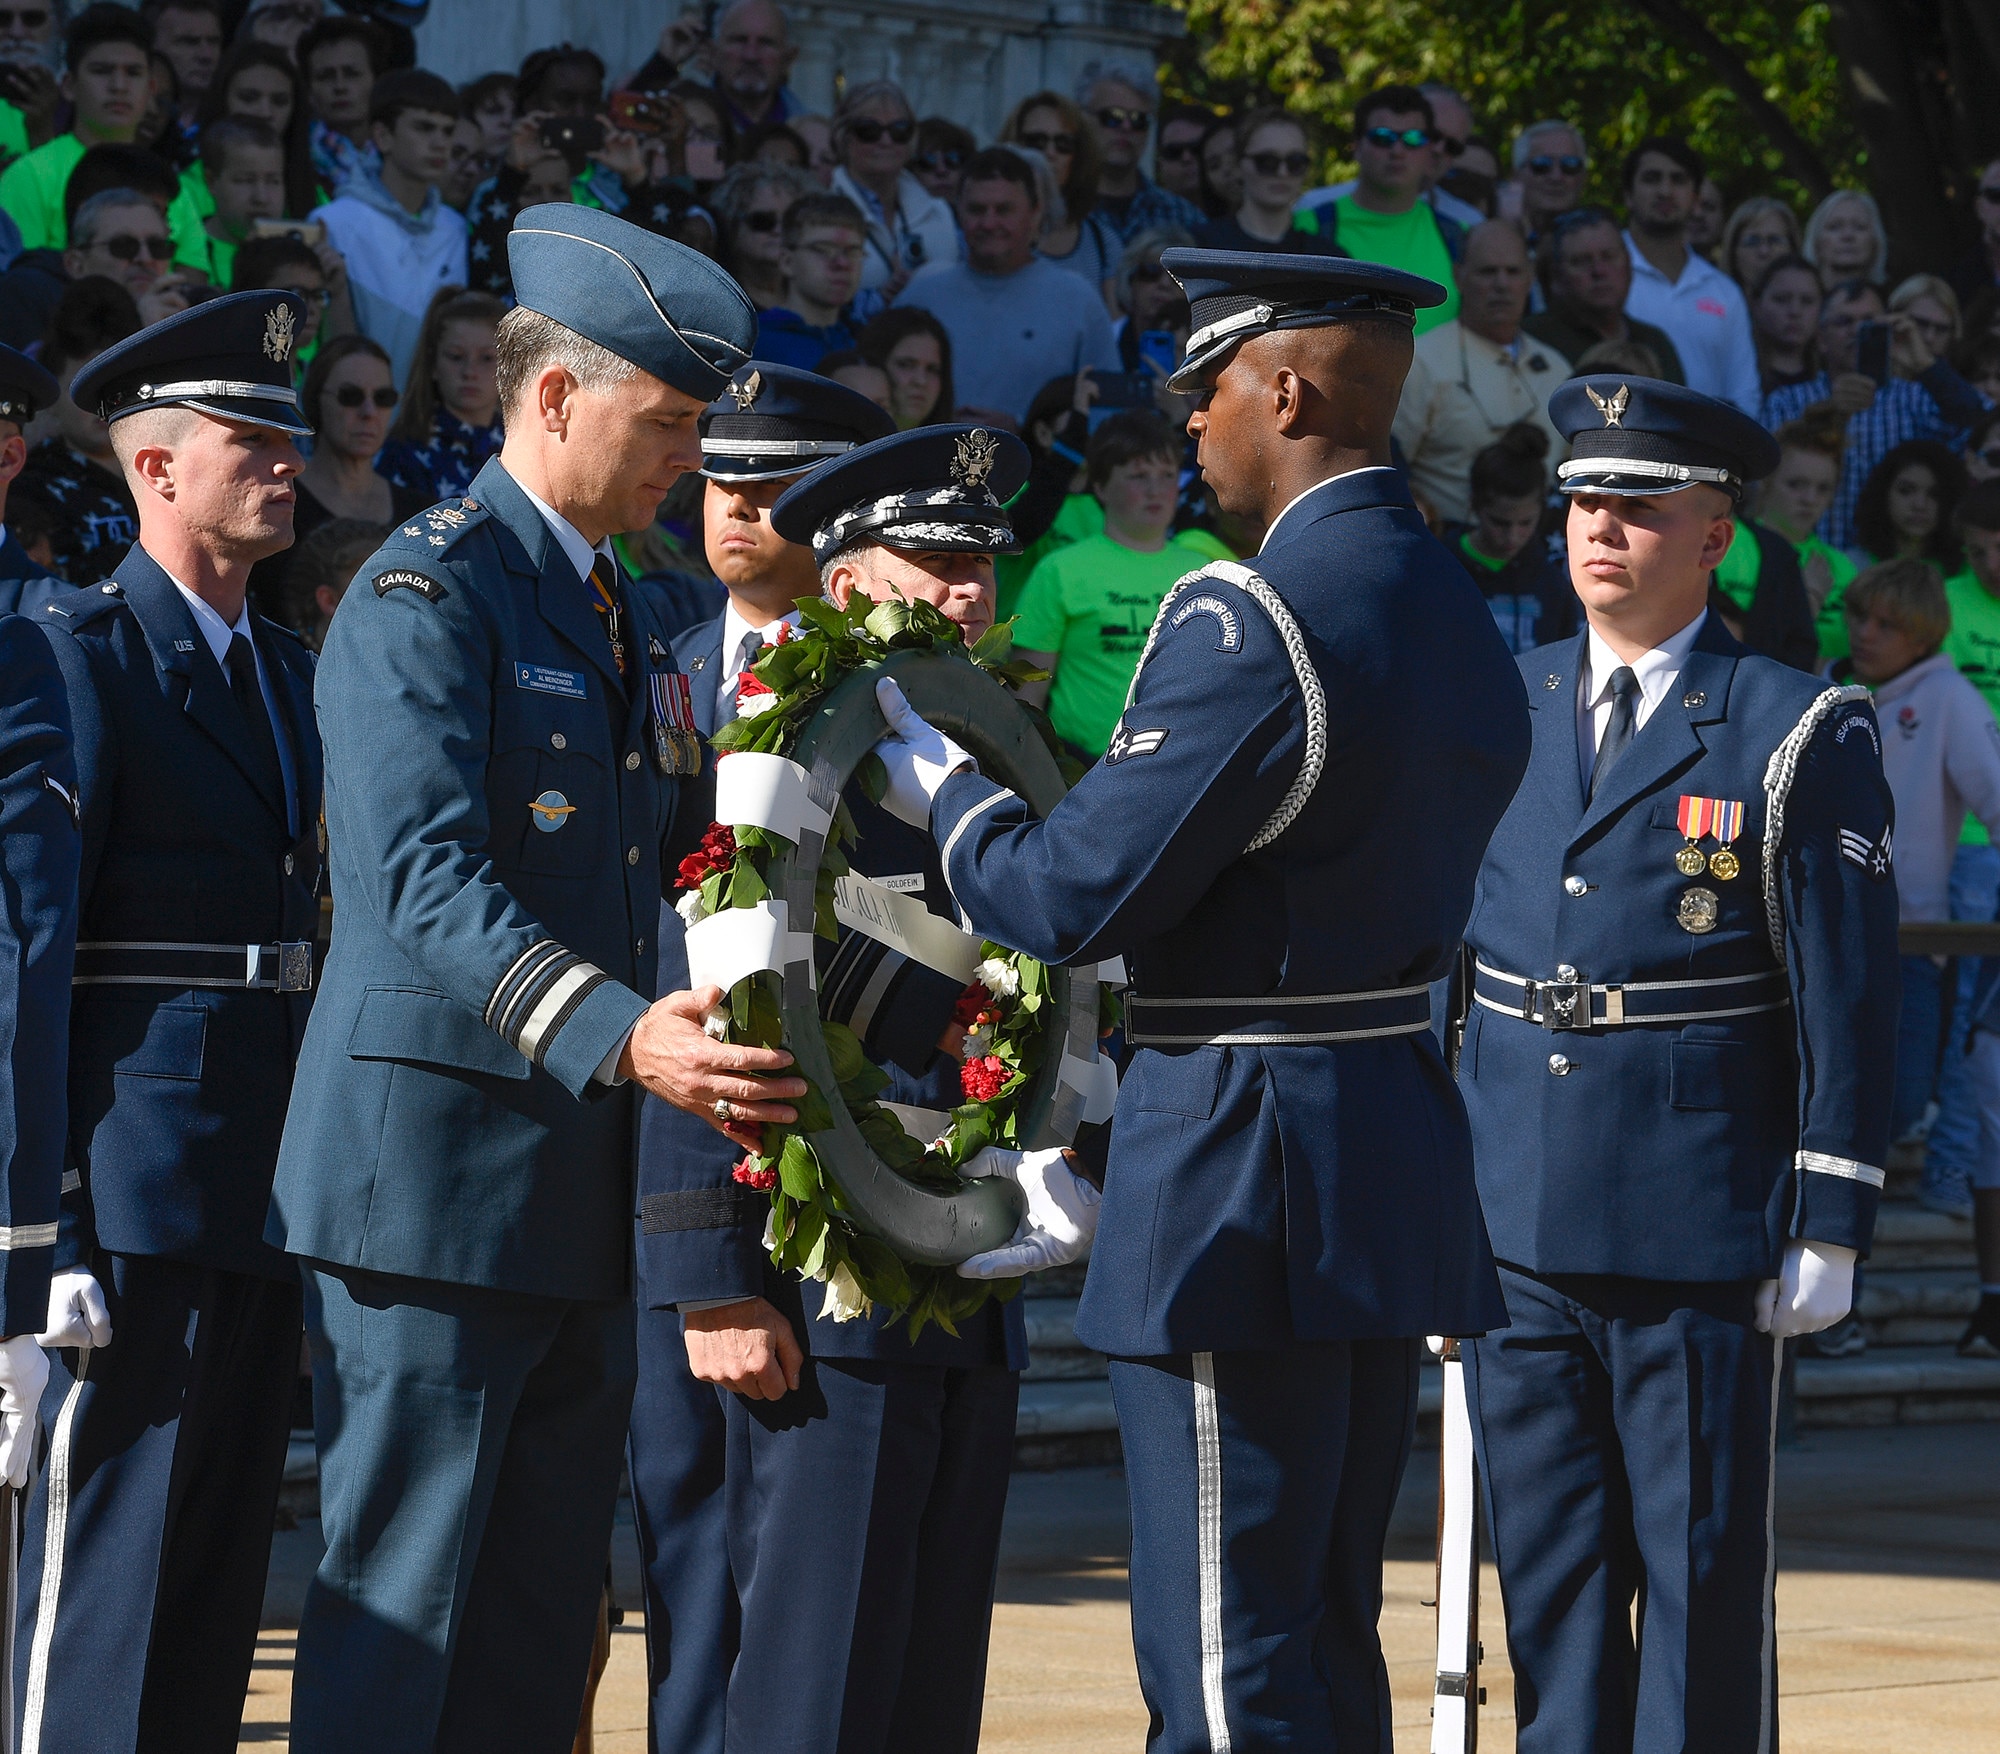 U.S. Air Force Honor Guard, Band join Commander Royal Canadian Air Force Lieutenant General Al Meinzinger and U.S. Air Force Chief of Staff General David Goldfein lay a wreath at the Tomb of the Unknown Soldier.